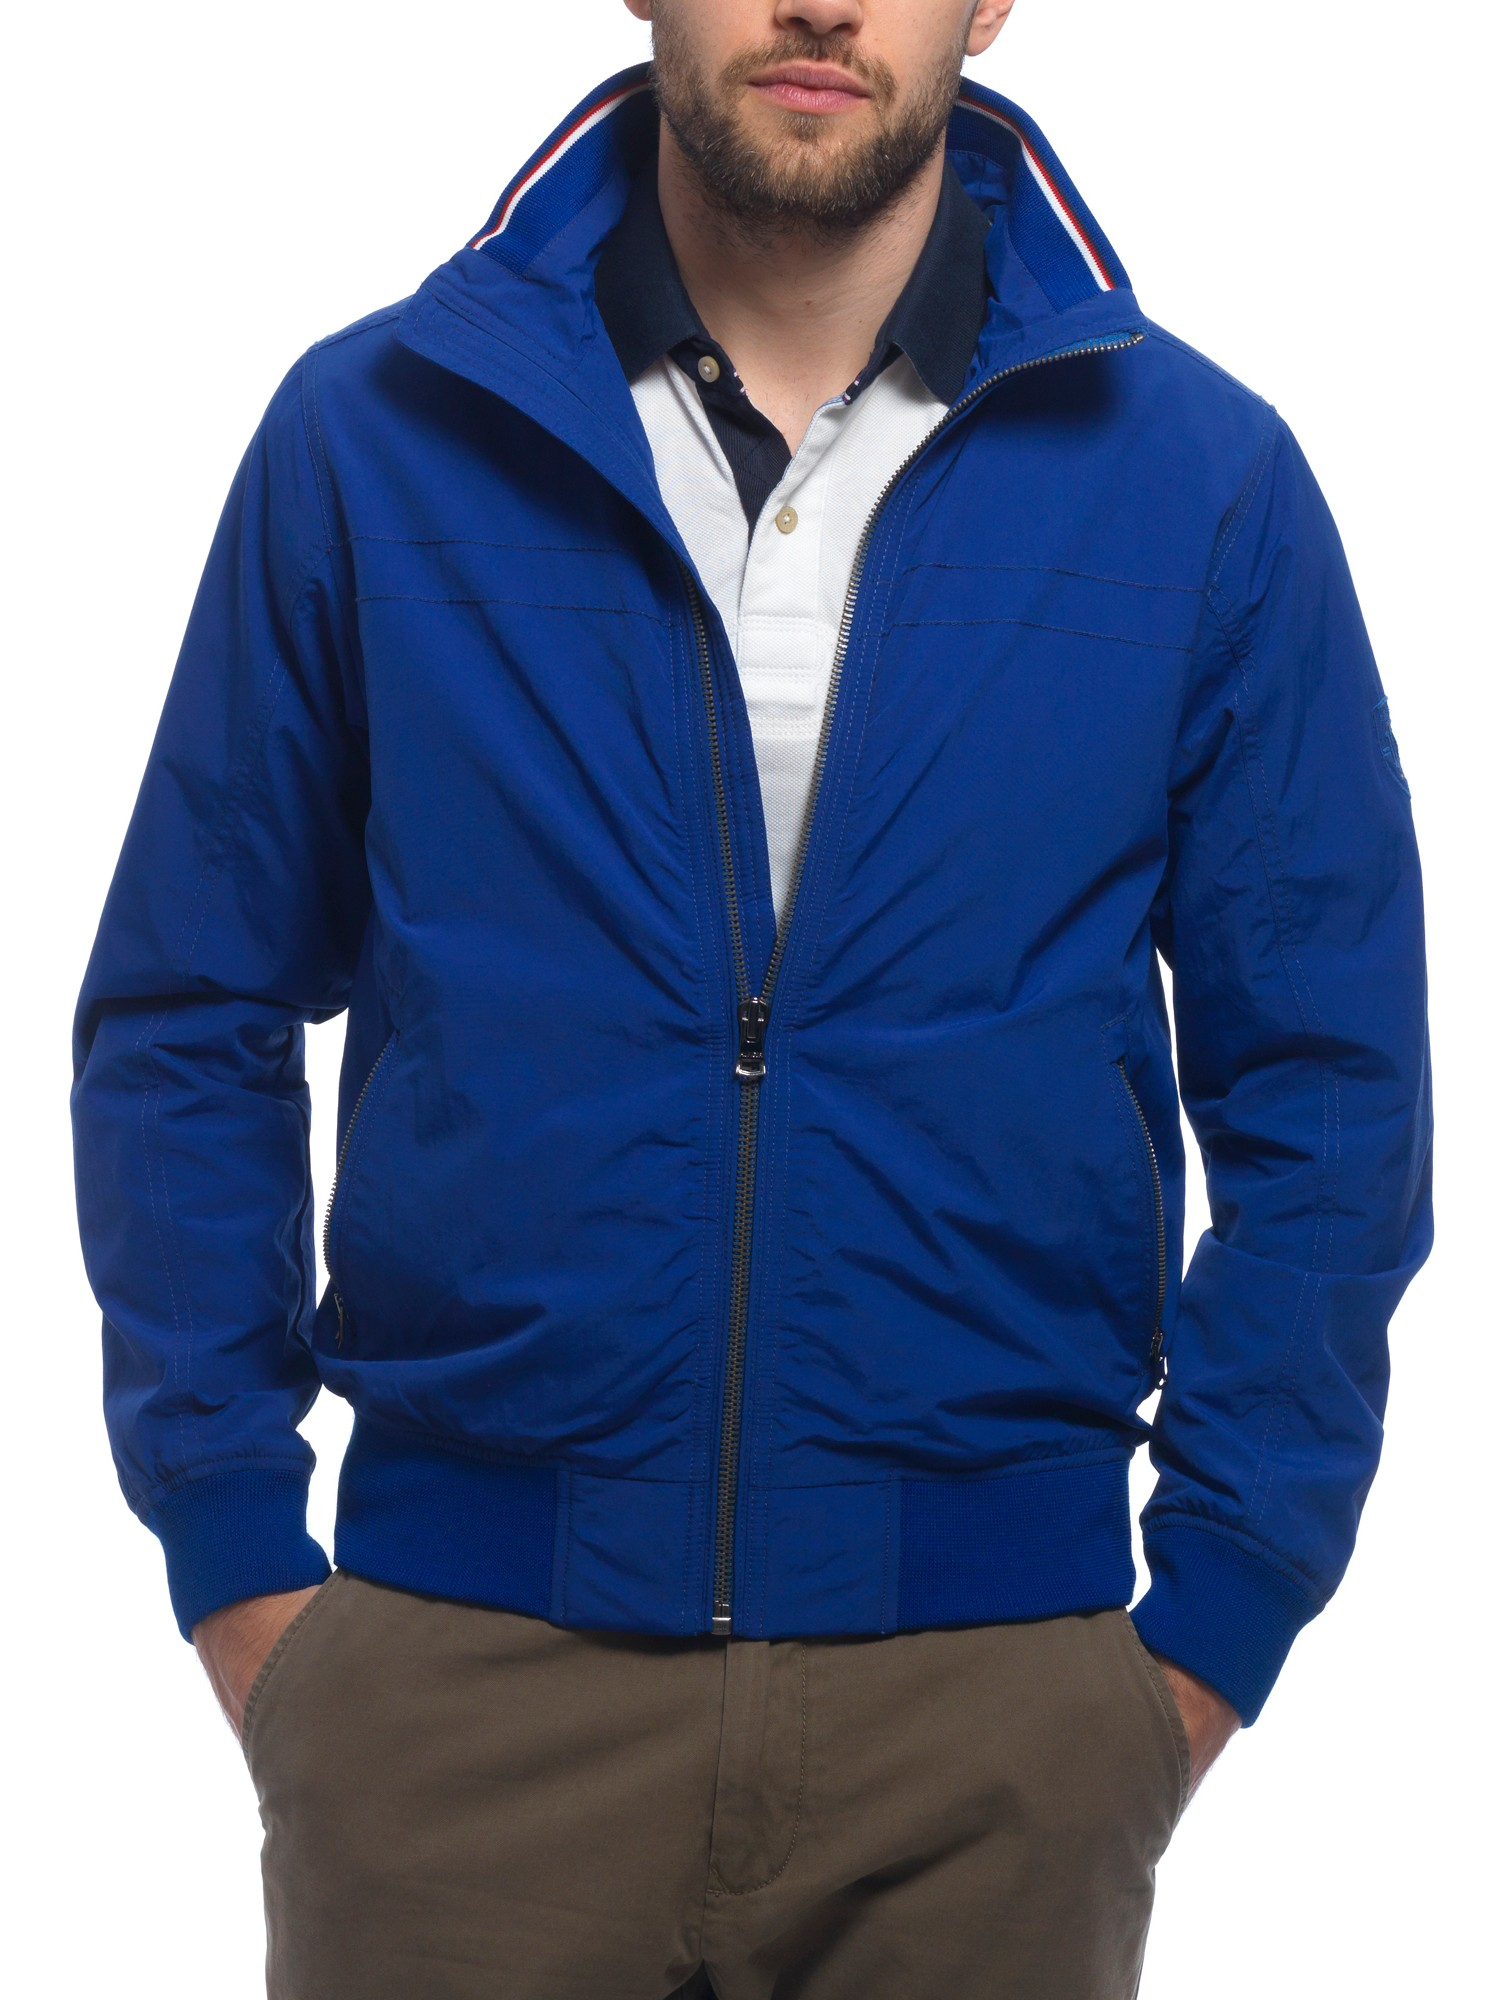 Bobby Jacket Tommy Hilfiger Online Hotsell, UP TO 50% OFF |  www.encuentroguionistas.com